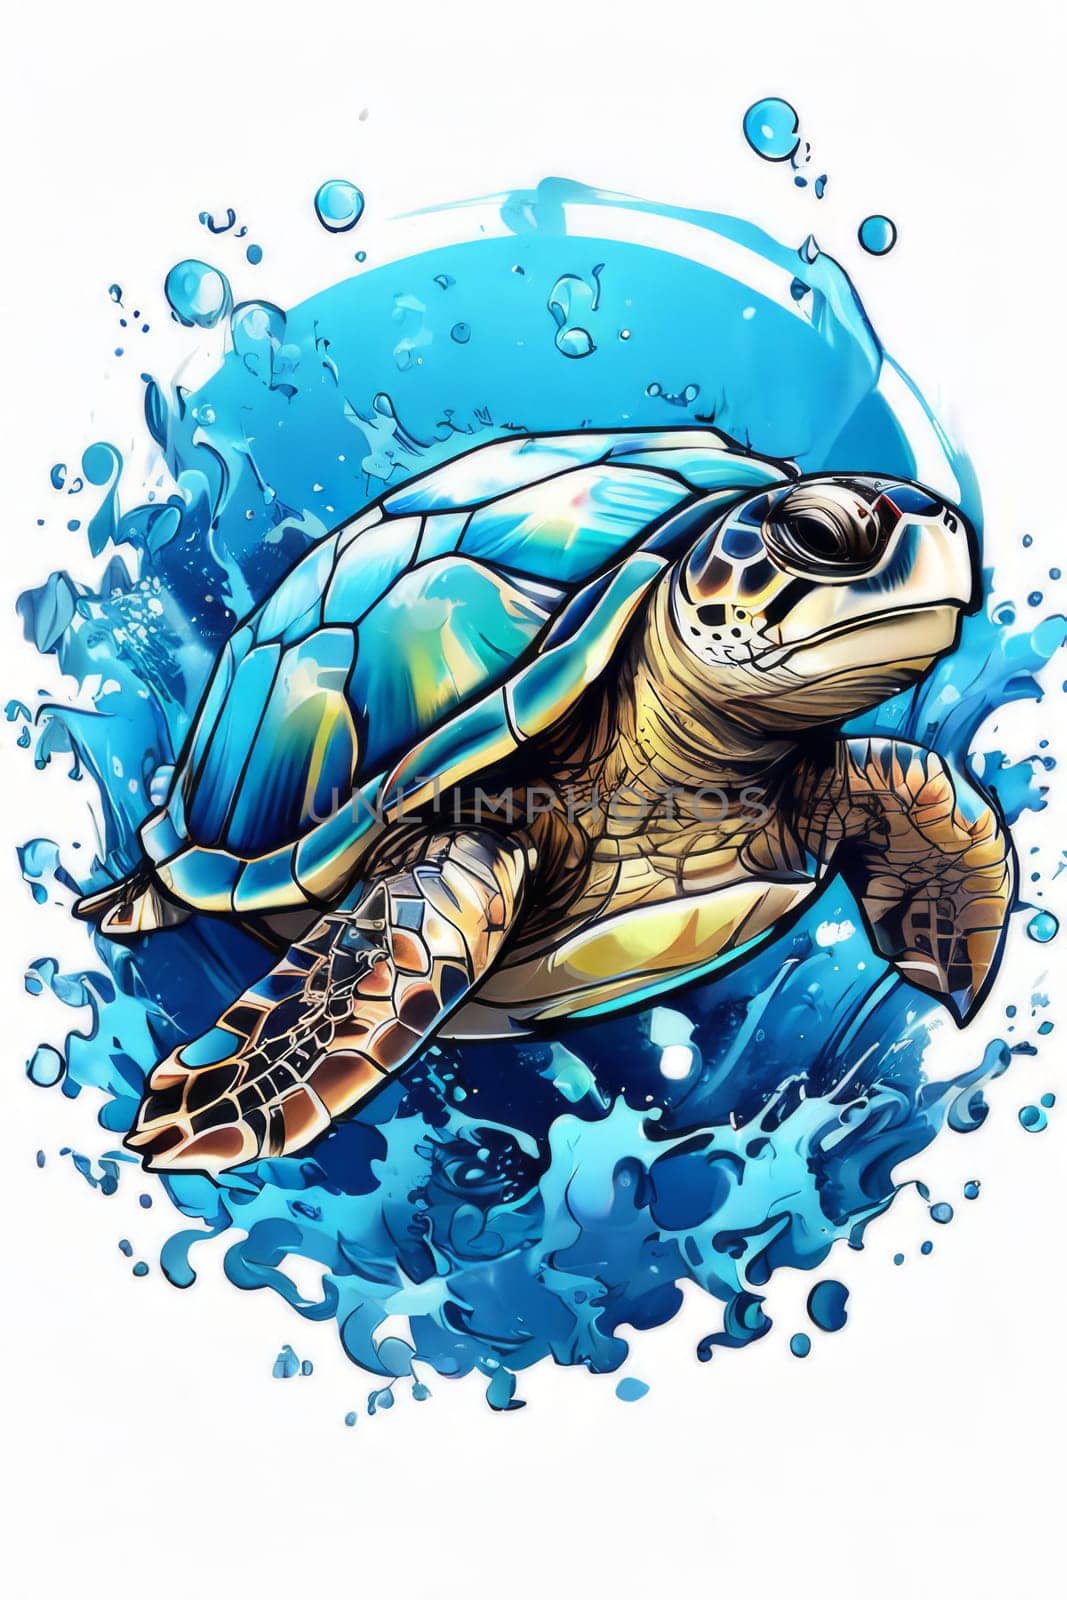 Image of sea turtle on white background. For educational materials for kids, game design, animated movies, tourism, stationery, Tshirt design, posters, postcards, childrens books